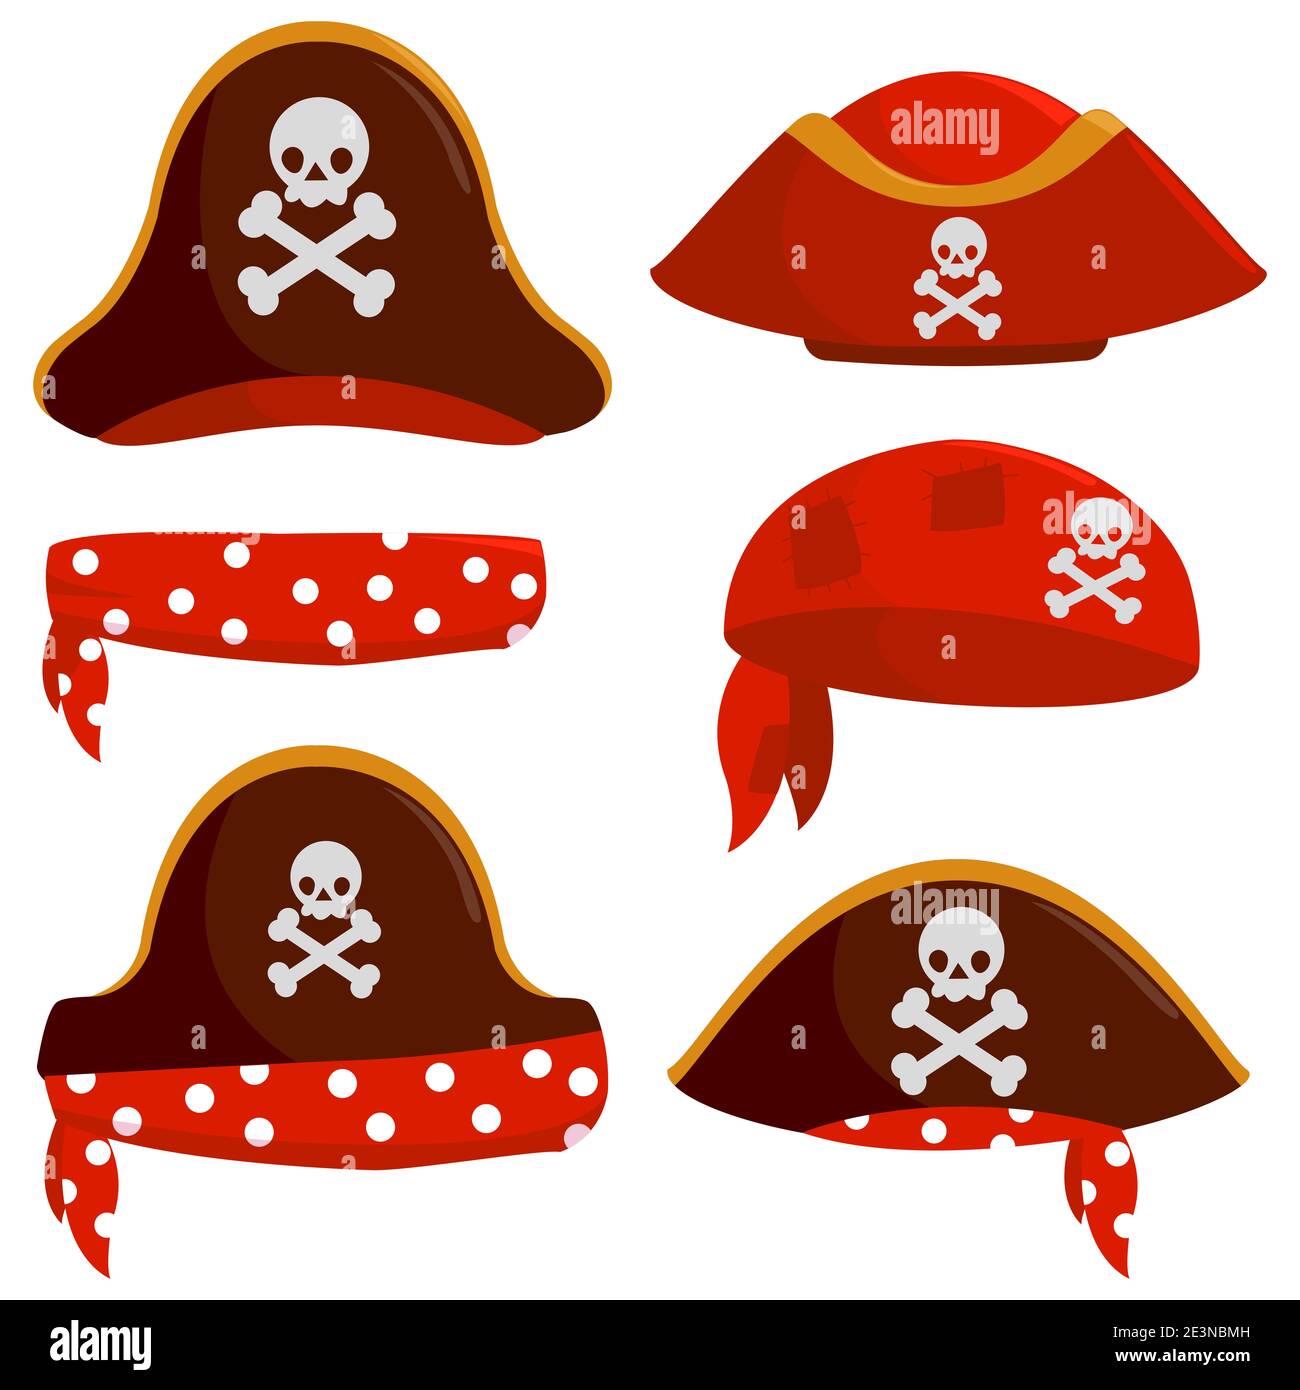 Pirate captain hats, bandannas and scarves. Illustration set Stock Photo